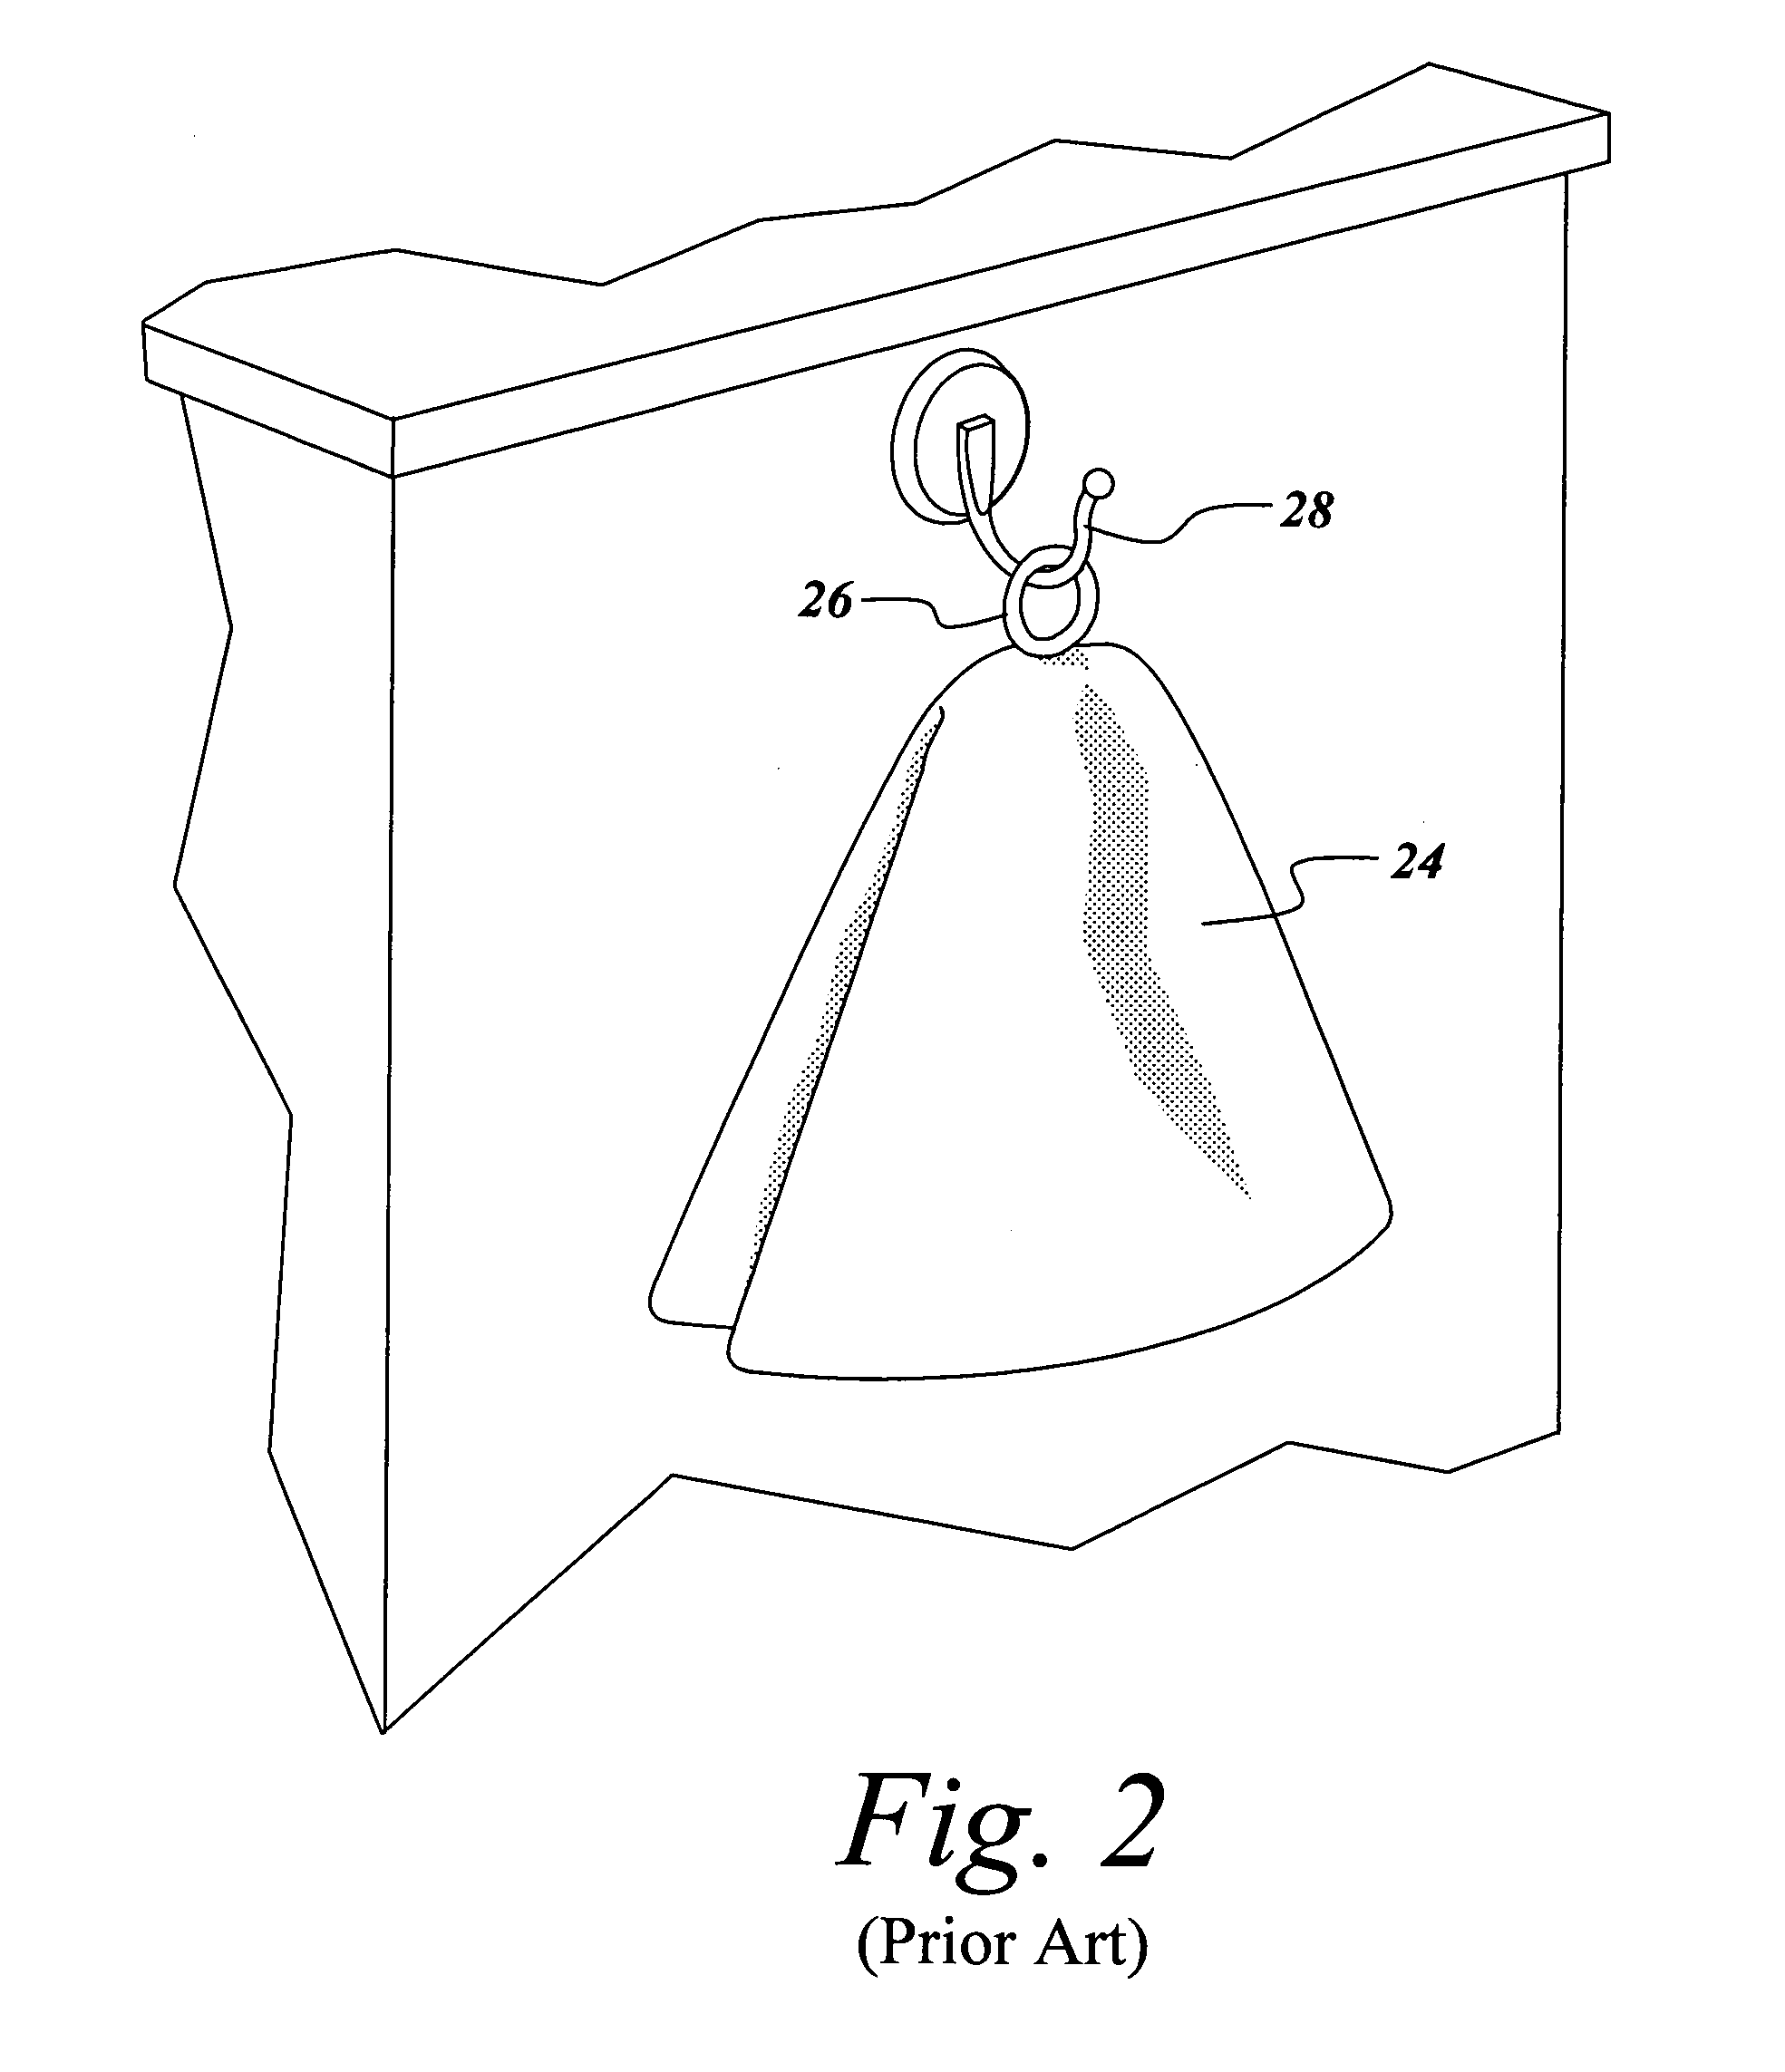 Method and apparatus for releasably attaching a towel to a close-ended rod